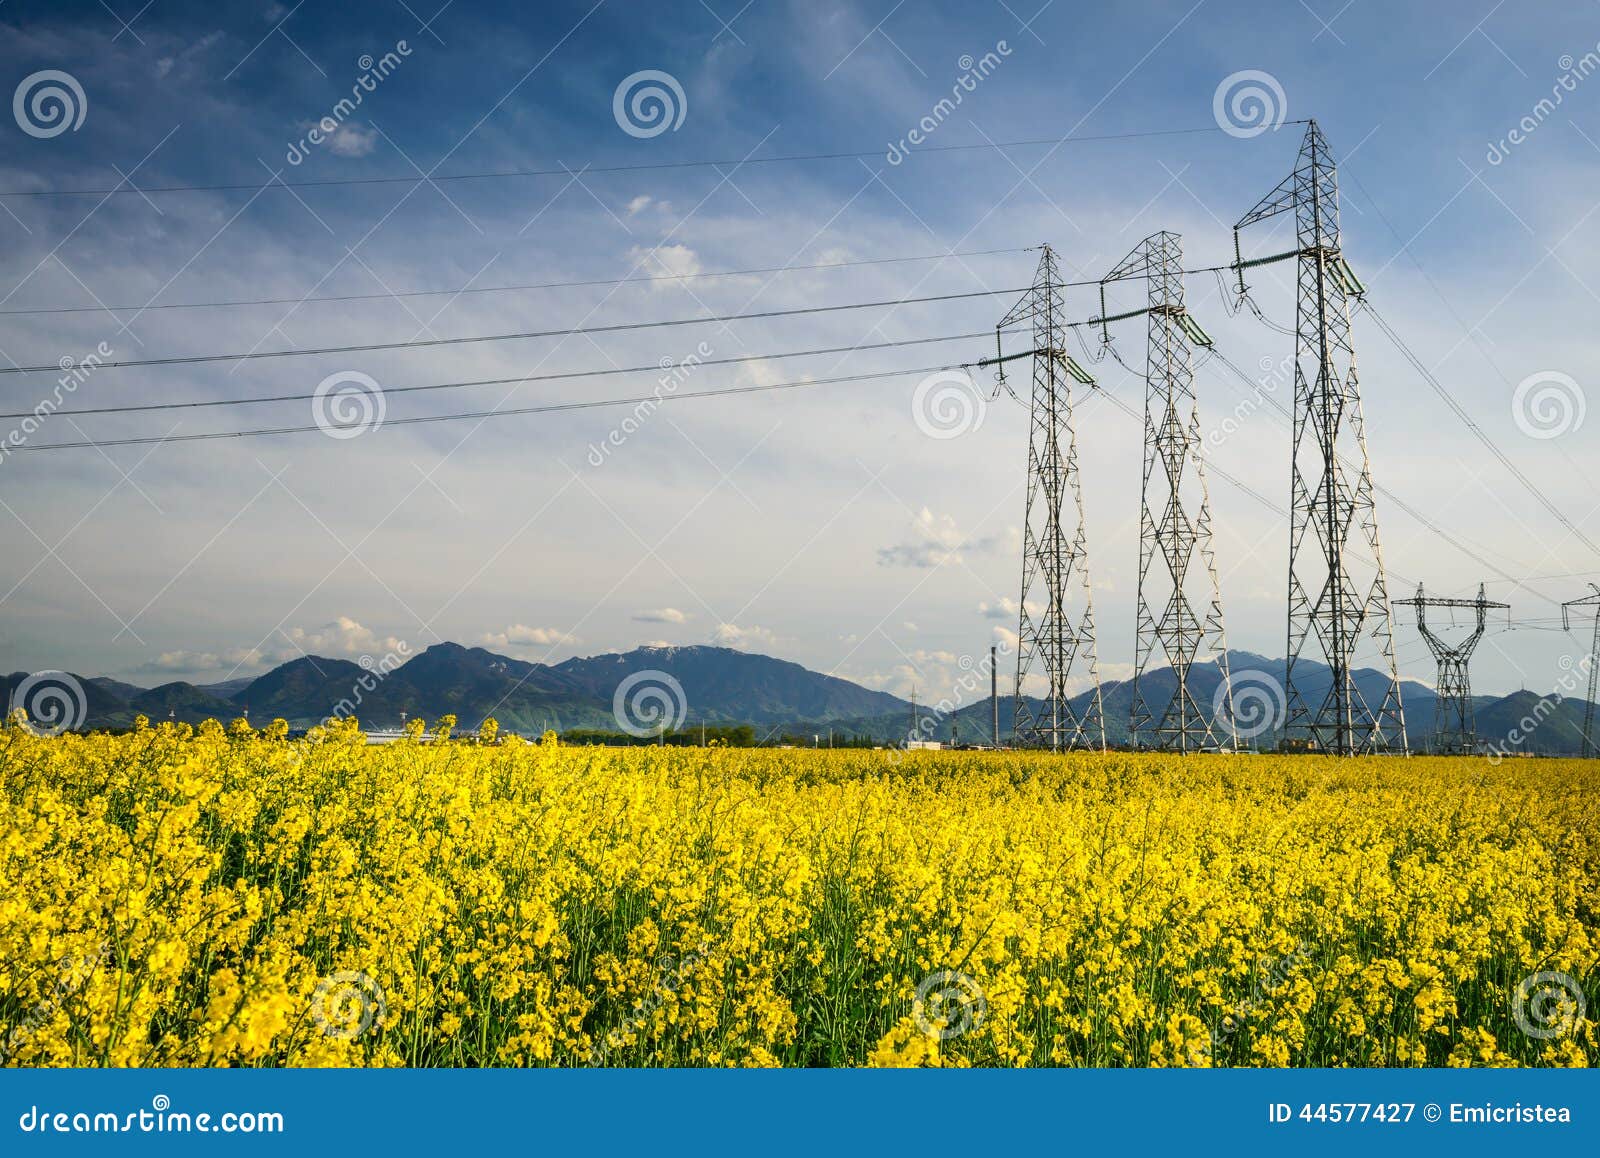 colza field and powerline electricity